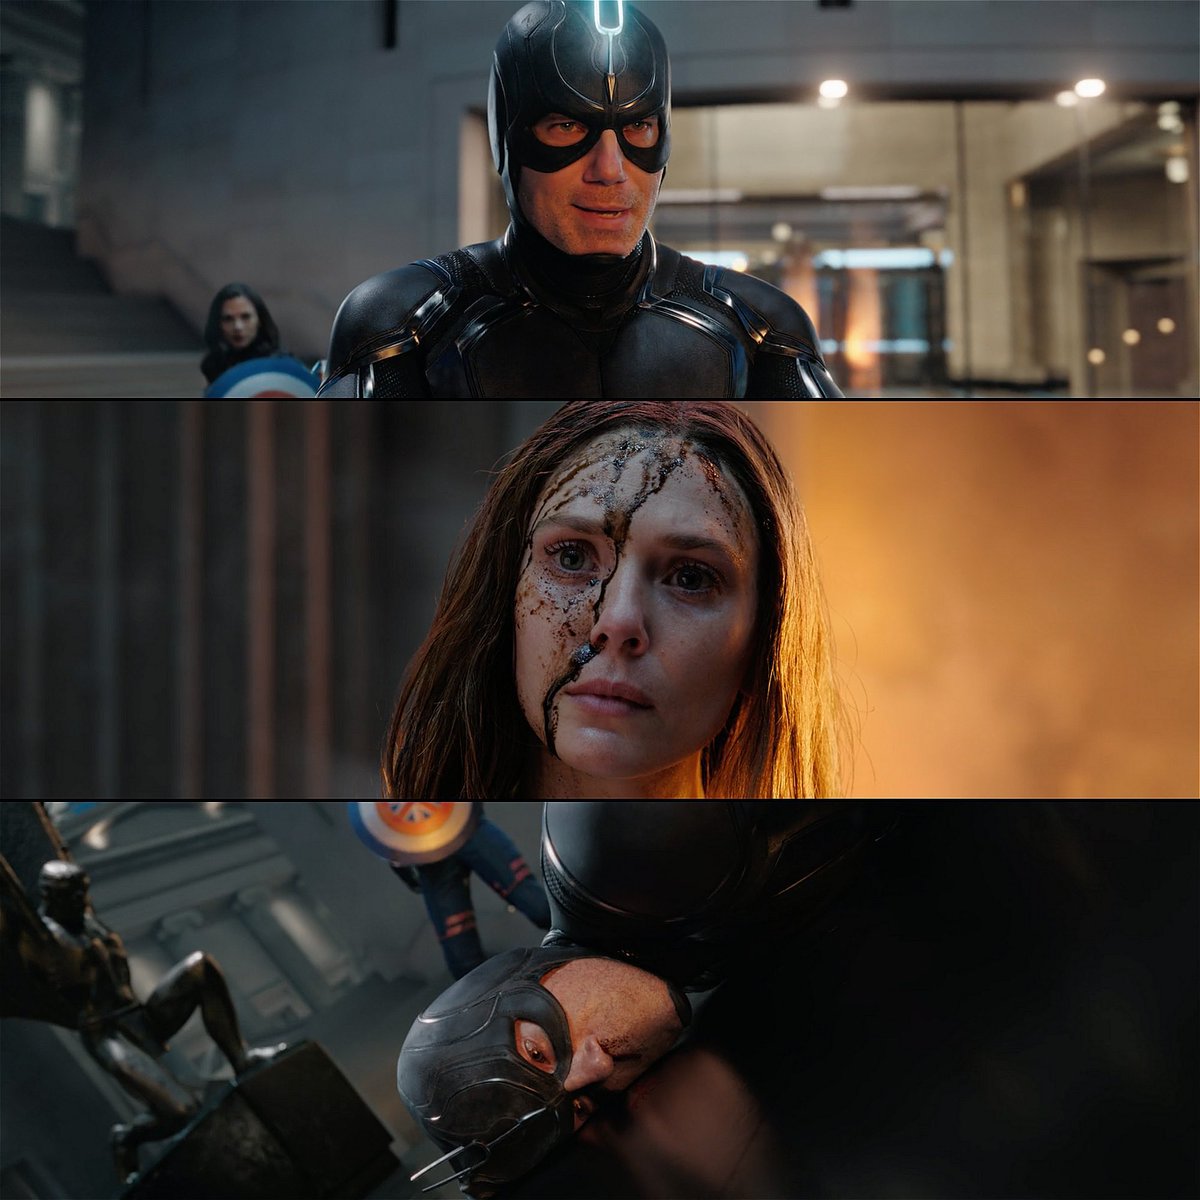 FUN FACT: Kevin Feige was initially confused on how Black Bolt was going to get taken out in #MultiverseOfMadness as he didn’t know what #Wanda would do “if he opened his mouth.”

Sam Raimi immediately turned around and said “What mouth?”